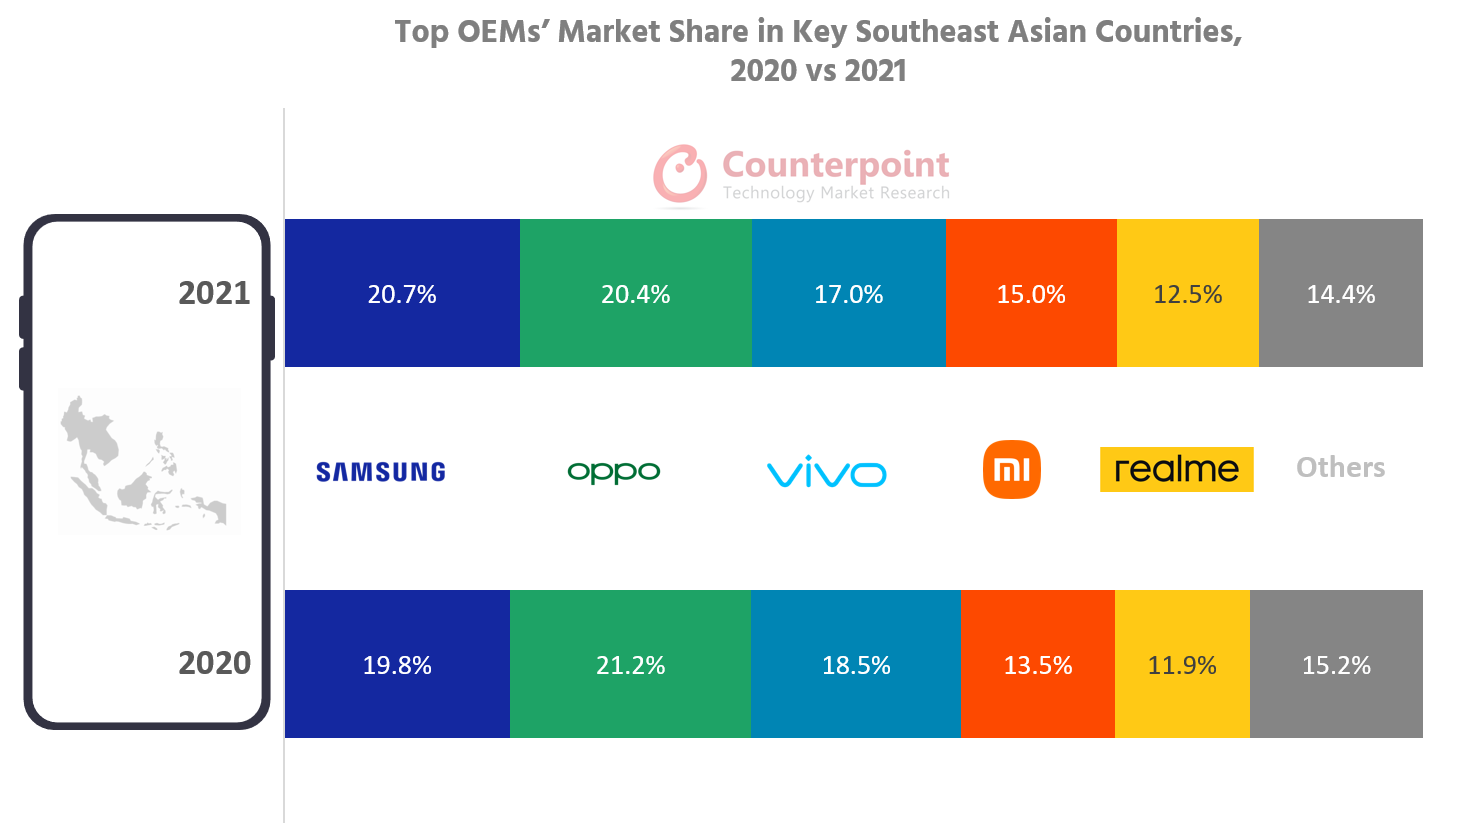 Top OEMs’ Market Share in Key Southeast Asian Countries, 2020 vs 2021